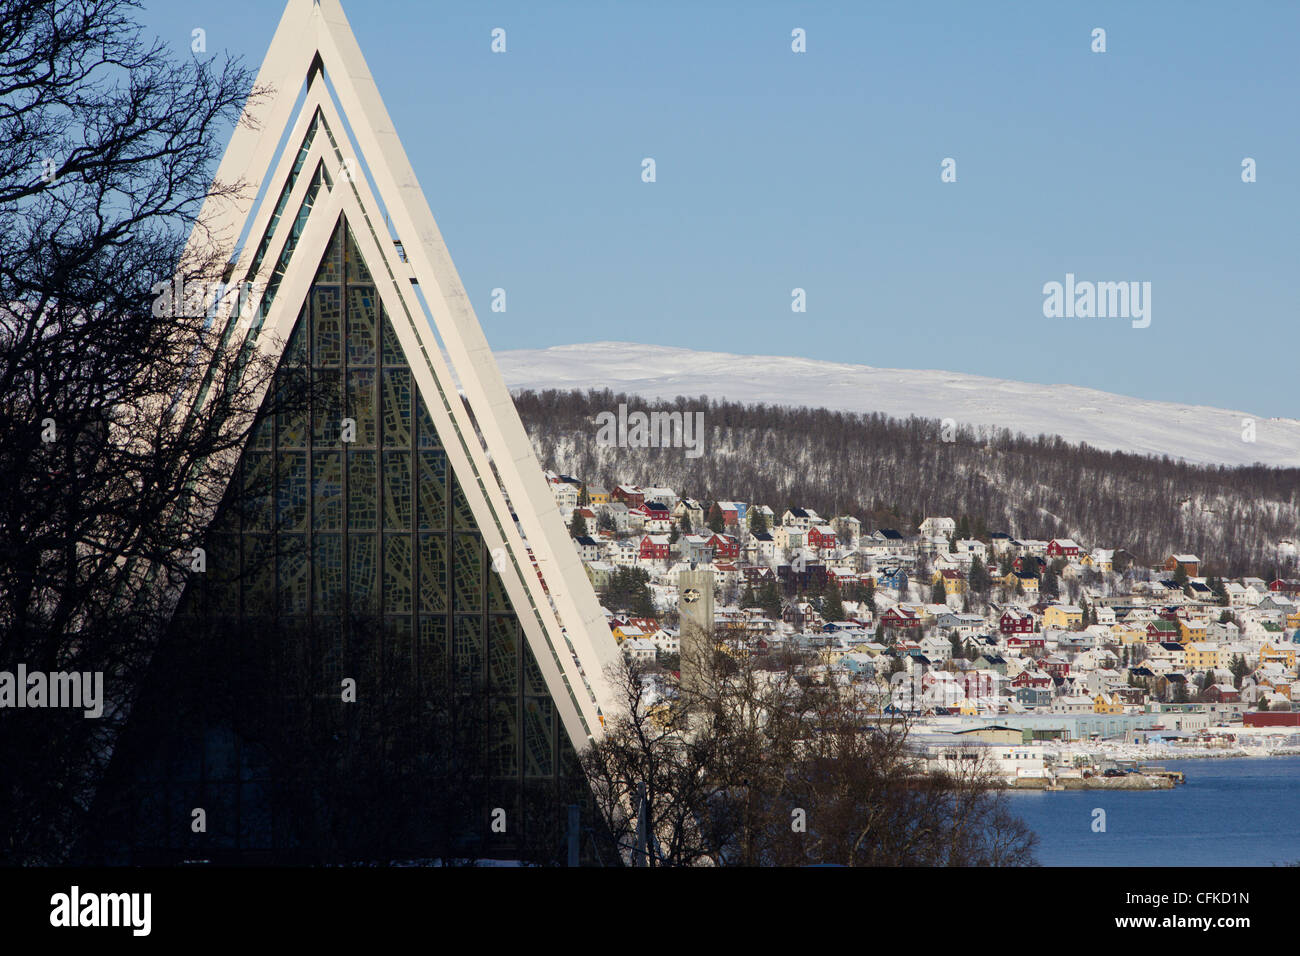 The Tromsdalen Church (Tromsdalen Kirke), also known as The Arctic Cathedral tromso troms norway Stock Photo